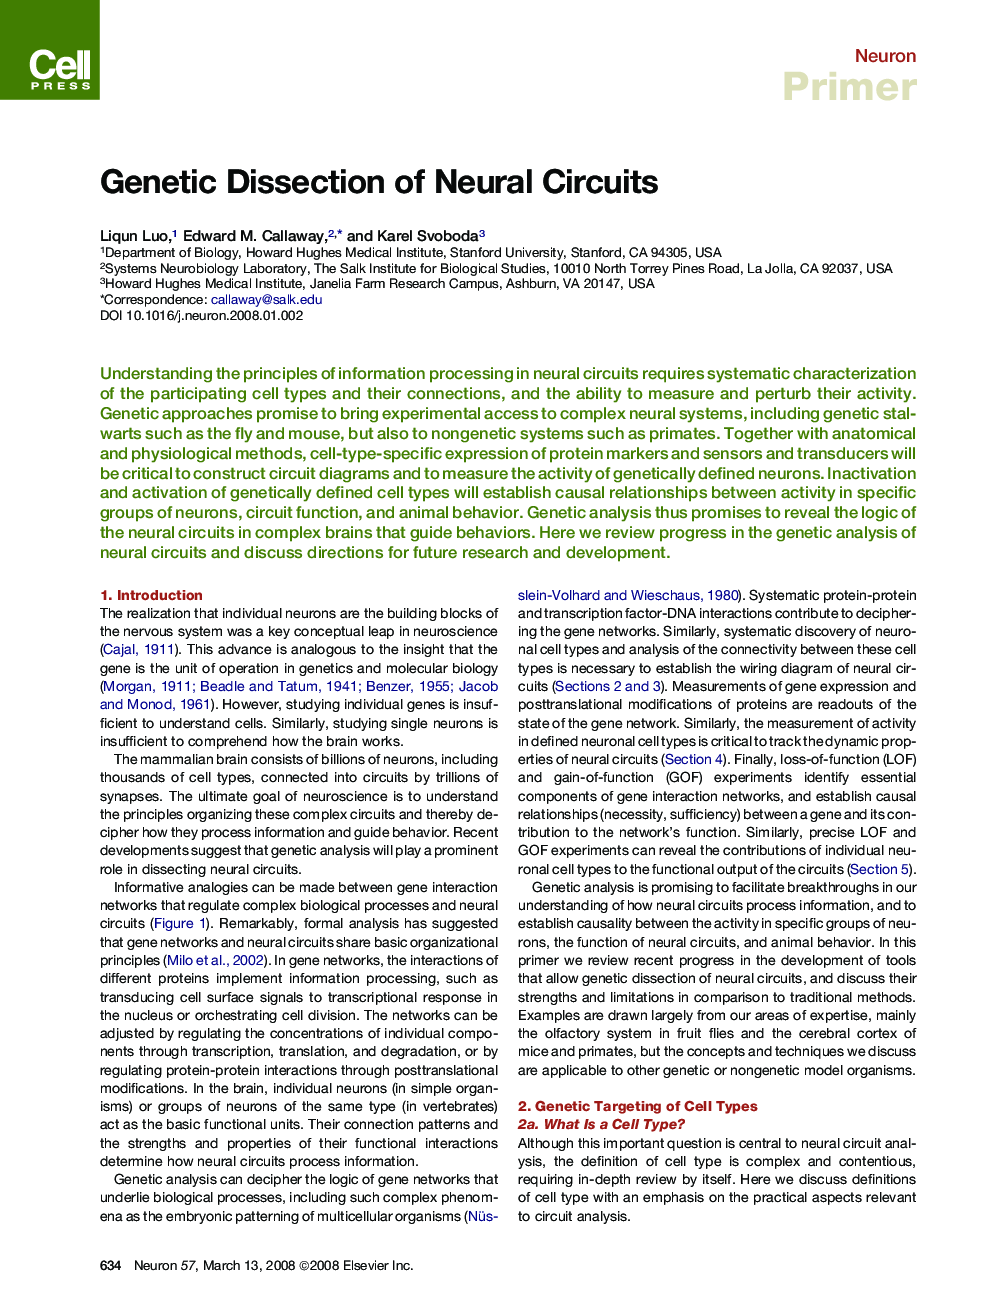 Genetic Dissection of Neural Circuits